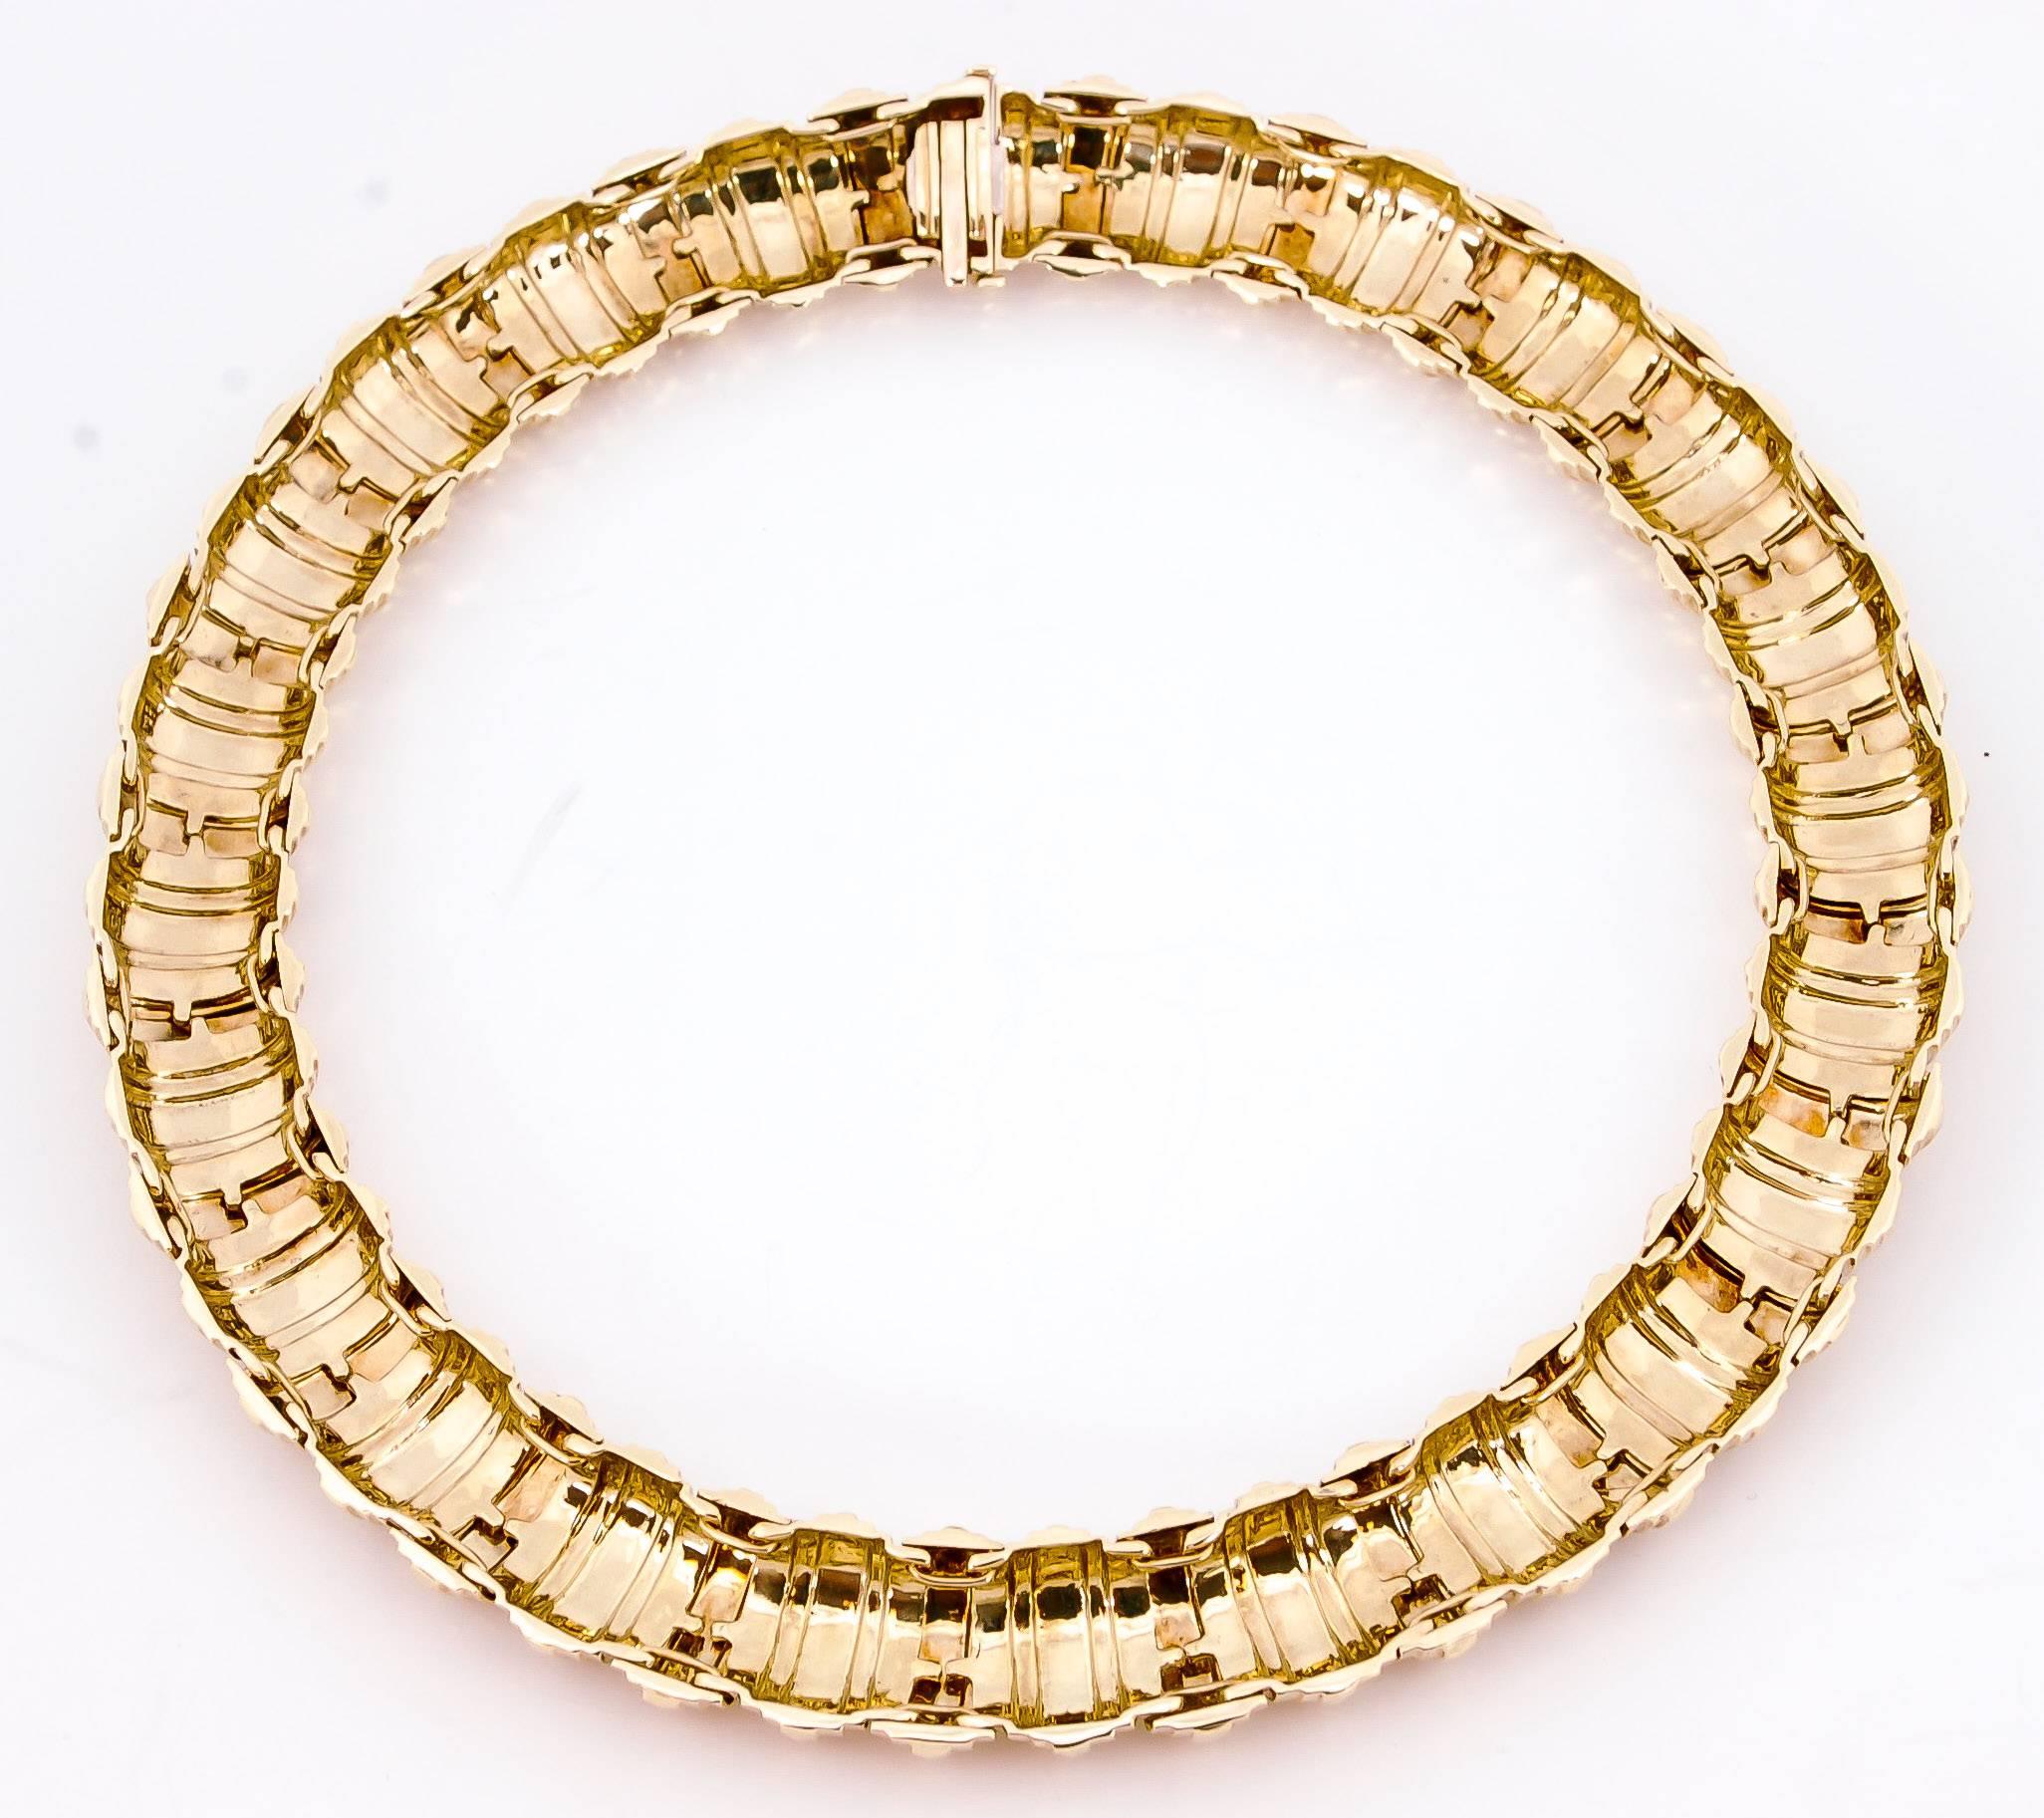 An incredible domed collar with an eye dazzling faceted surface that reflects light in14kt yellow.  This collar is a perfect stand alone piece as well as an great fixture for your favorite pendant. The collar weighs 134 grams and is 18 mm wide and